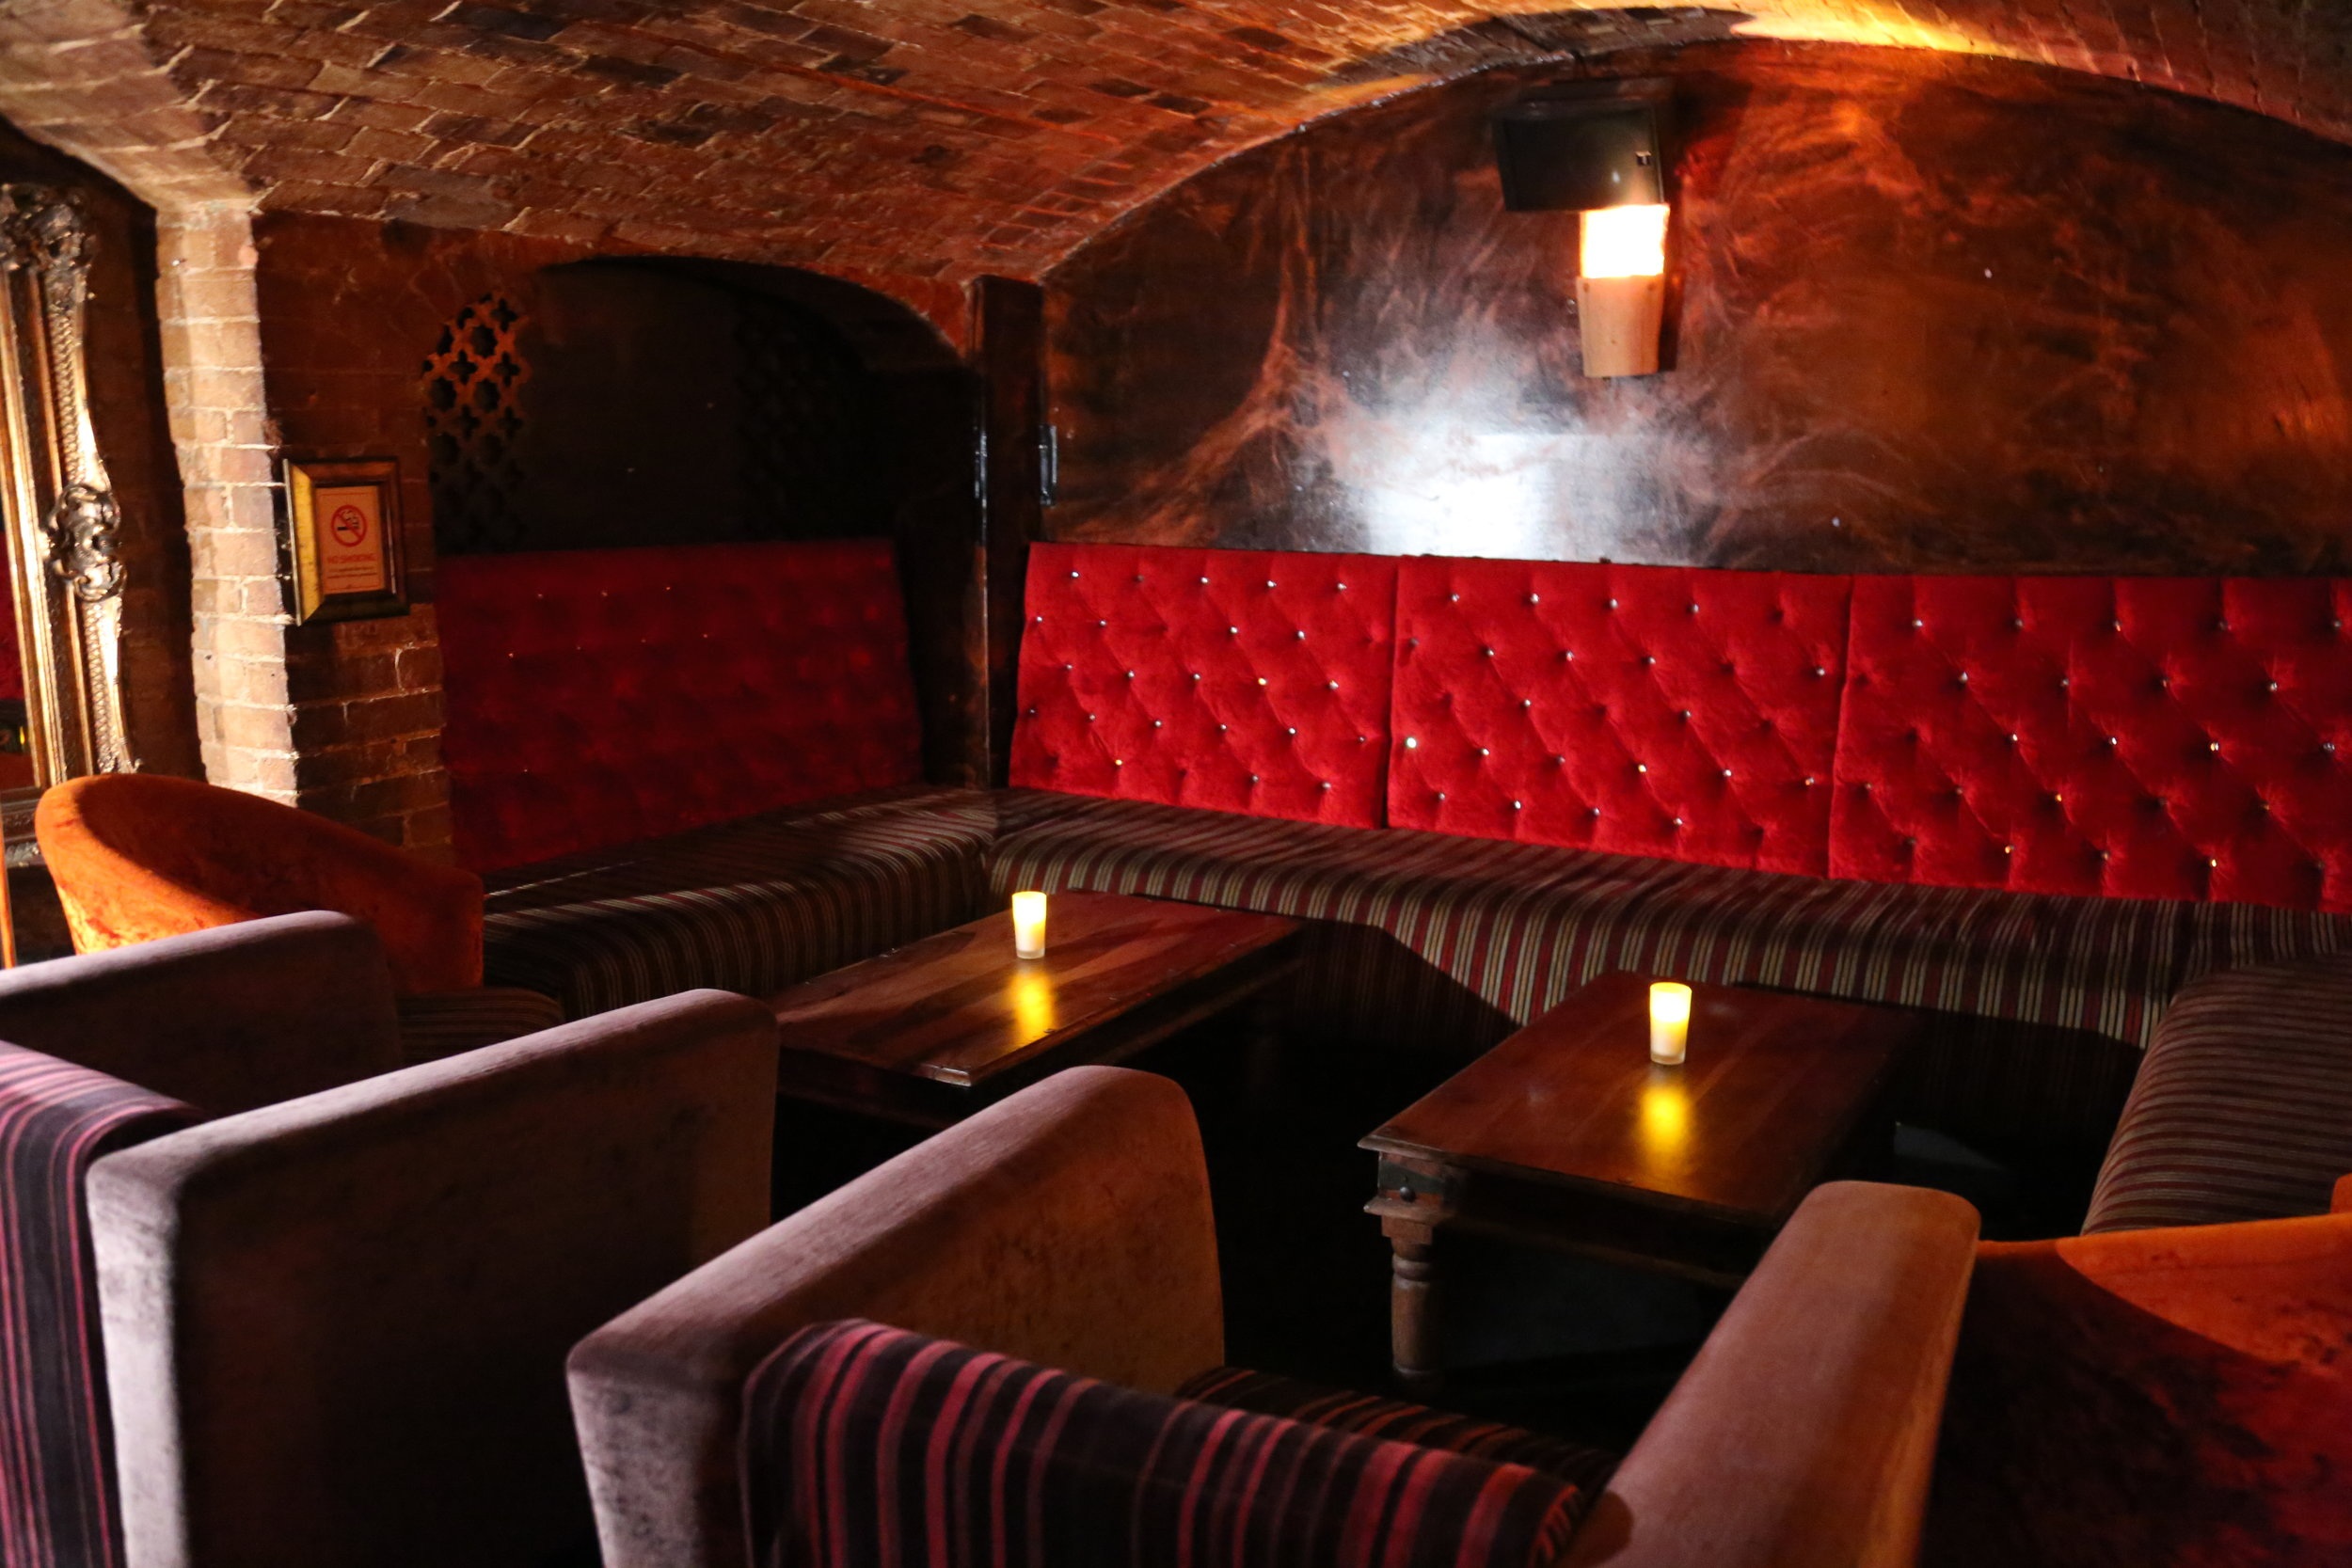 The UK's Most Glamorous Bars and Night Clubs